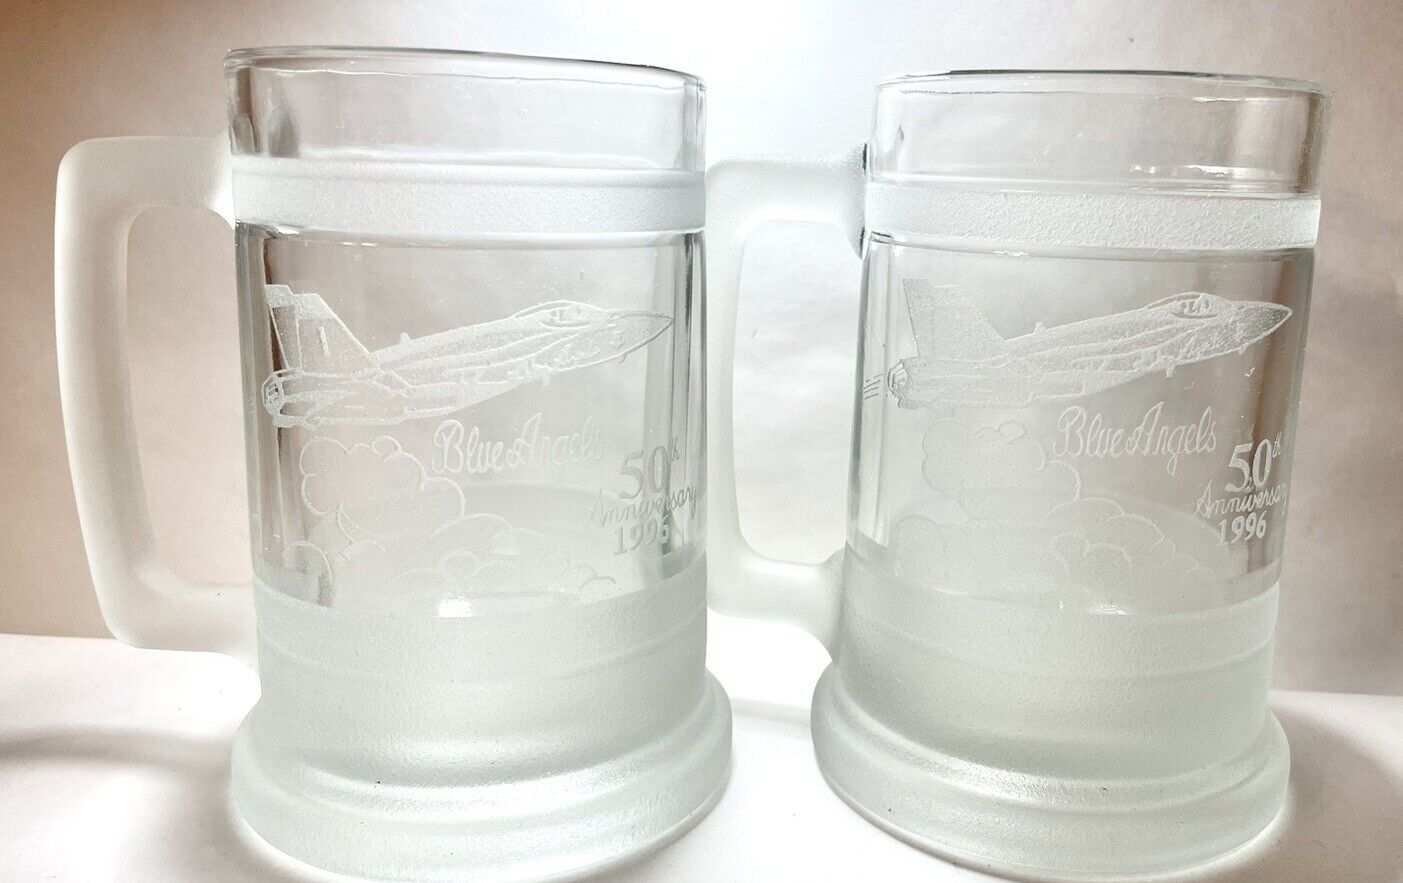 Navy Blue Angels 50th Anniversary 1996 frosted beer mugs Set Of Two